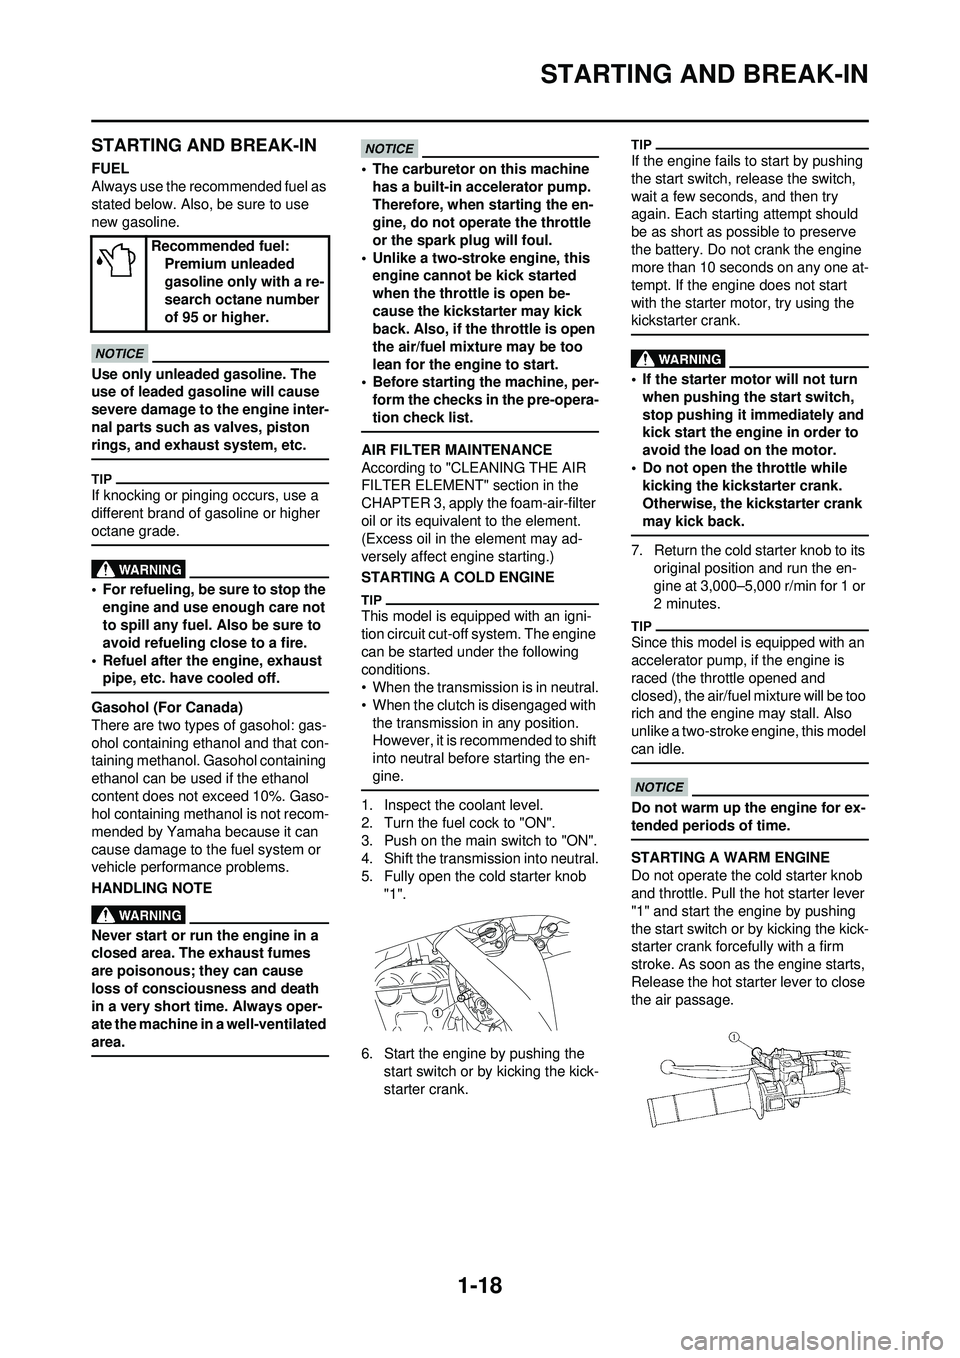 YAMAHA WR 250F 2010  Owners Manual 1-18
STARTING AND BREAK-IN
STARTING AND BREAK-IN
FUEL
Always use the recommended fuel as 
stated below. Also, be sure to use 
new gasoline.
Use only unleaded gasoline. The 
use of leaded gasoline will